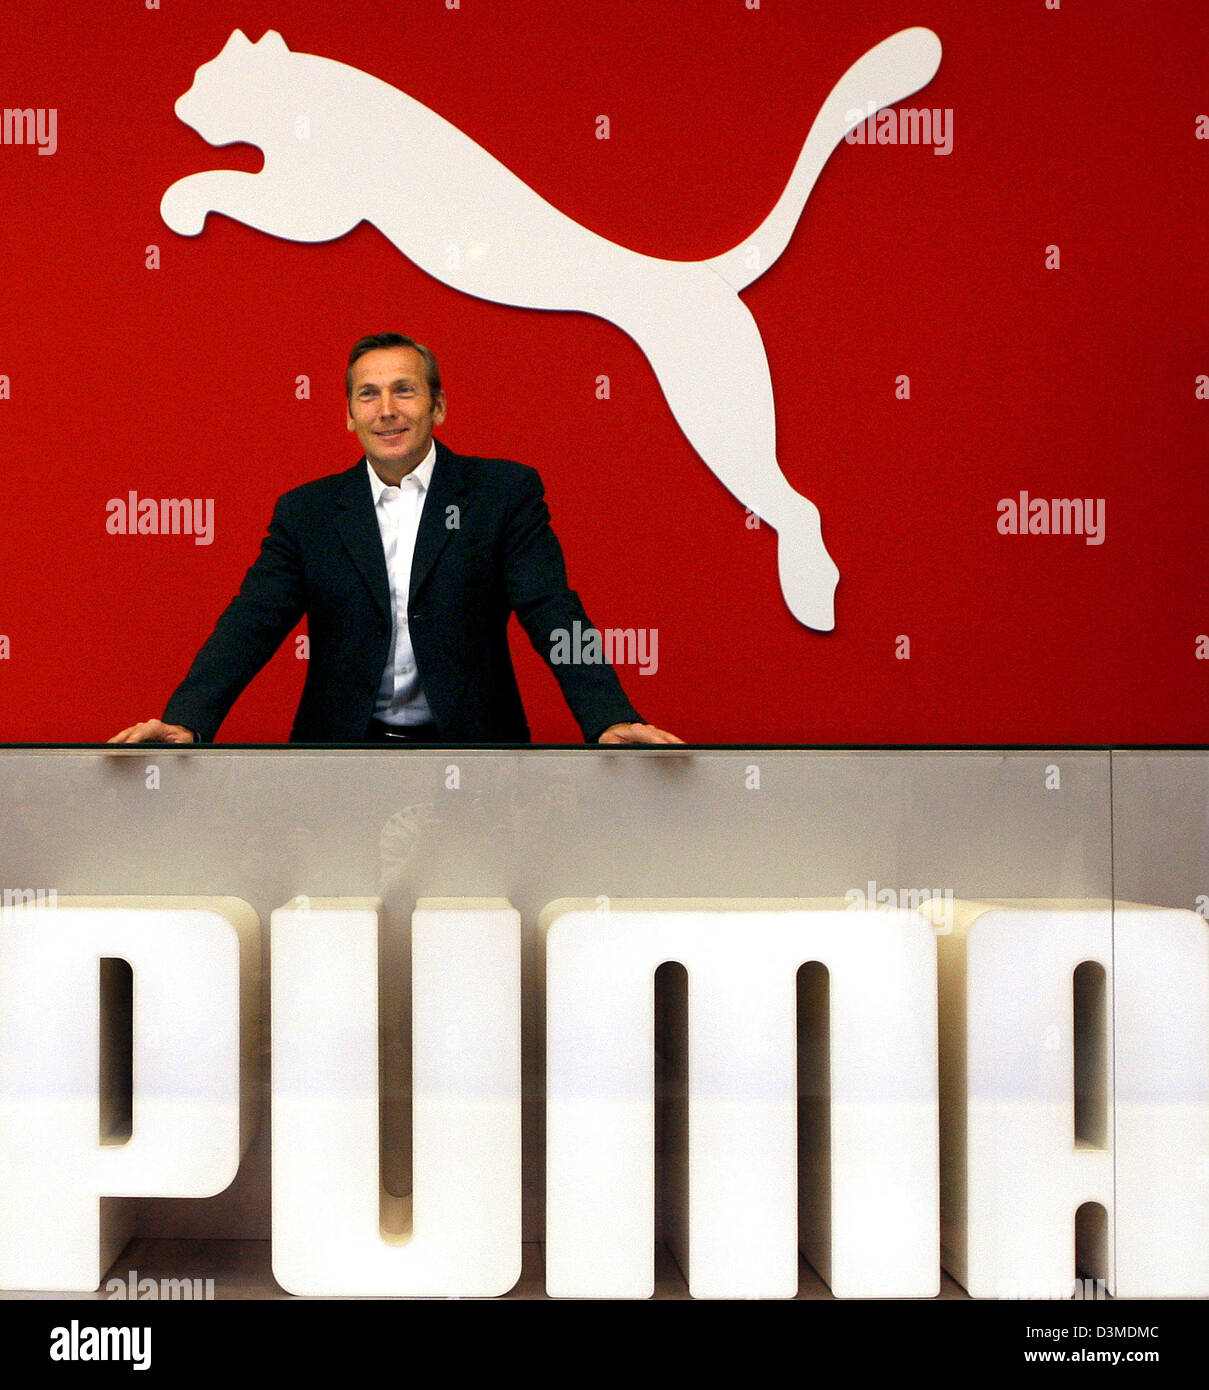 Sporting goods company Puma AG chairman Jochen Zeitz smiles below the Puma logo prior to the company's balance press conference in Nuremberg, Germany, Friday 10 February 2006. According to Zeitz the company achieved record results in the business year 2005. Photo: Daniel Karmann Stock Photo